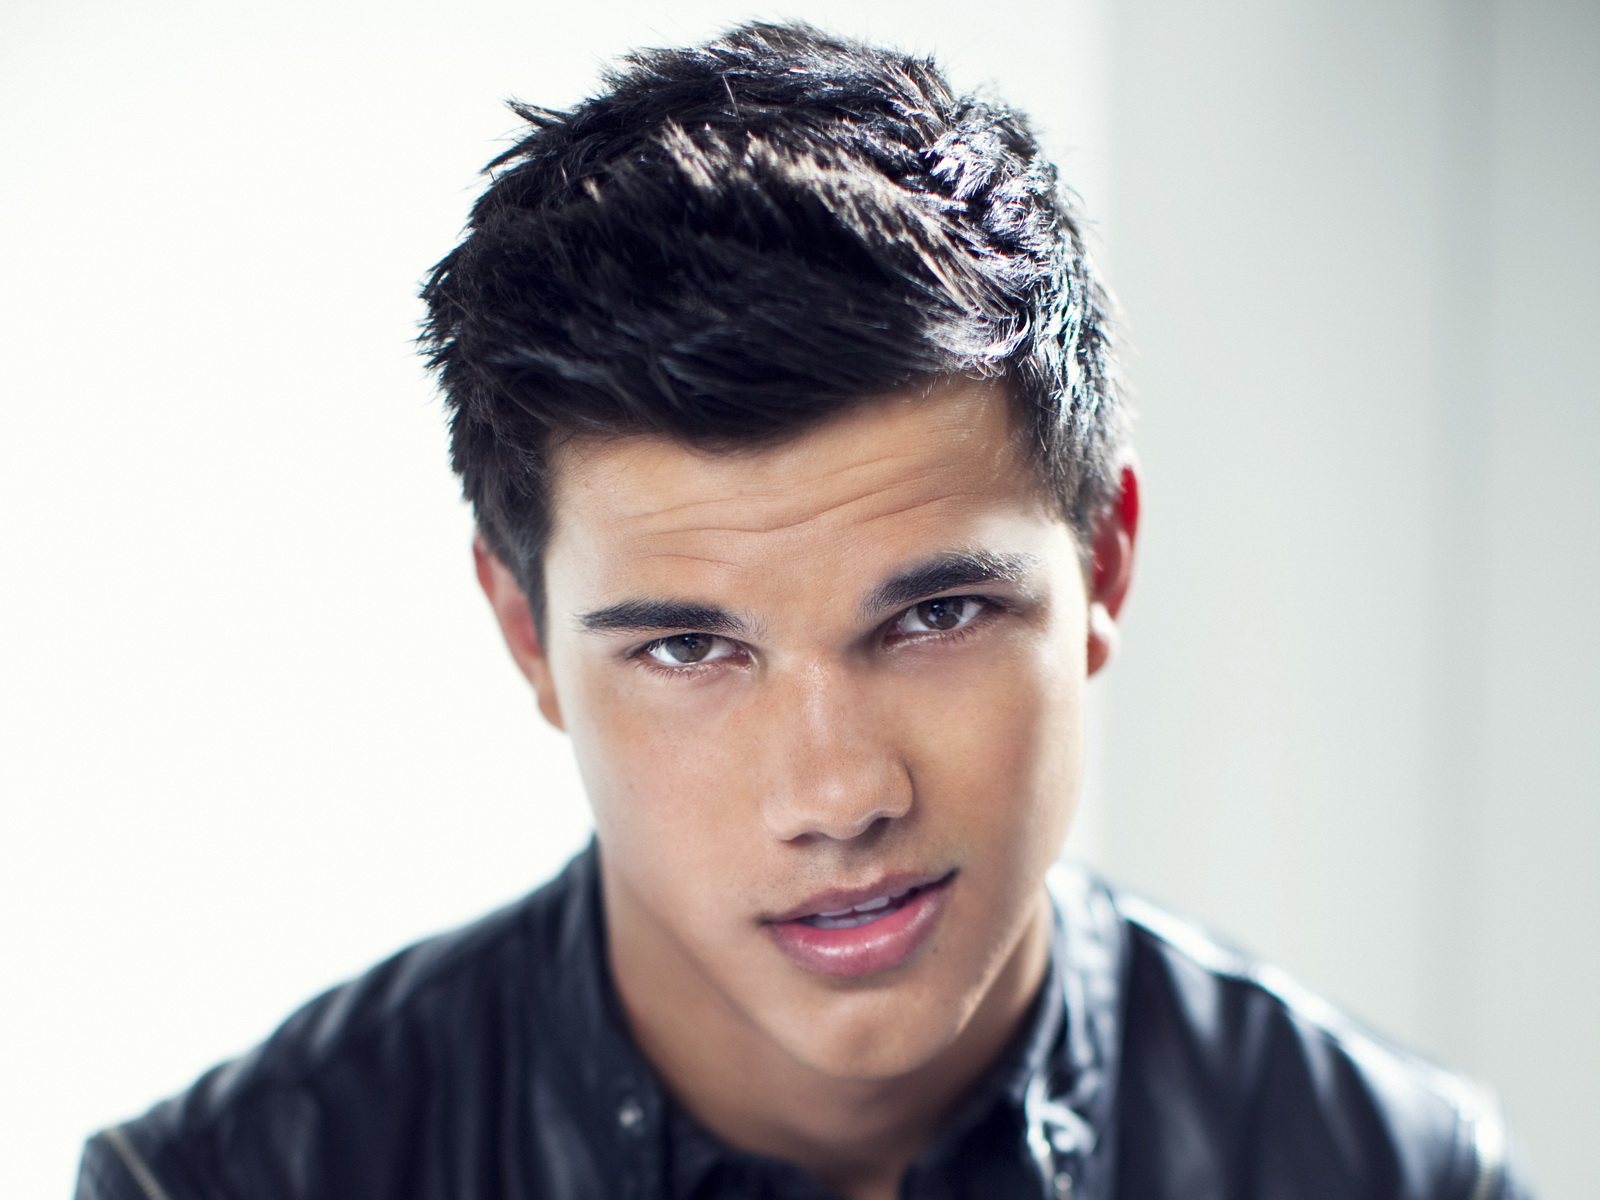 Taylor Lautner Wallpapers High Resolution and Quality Download